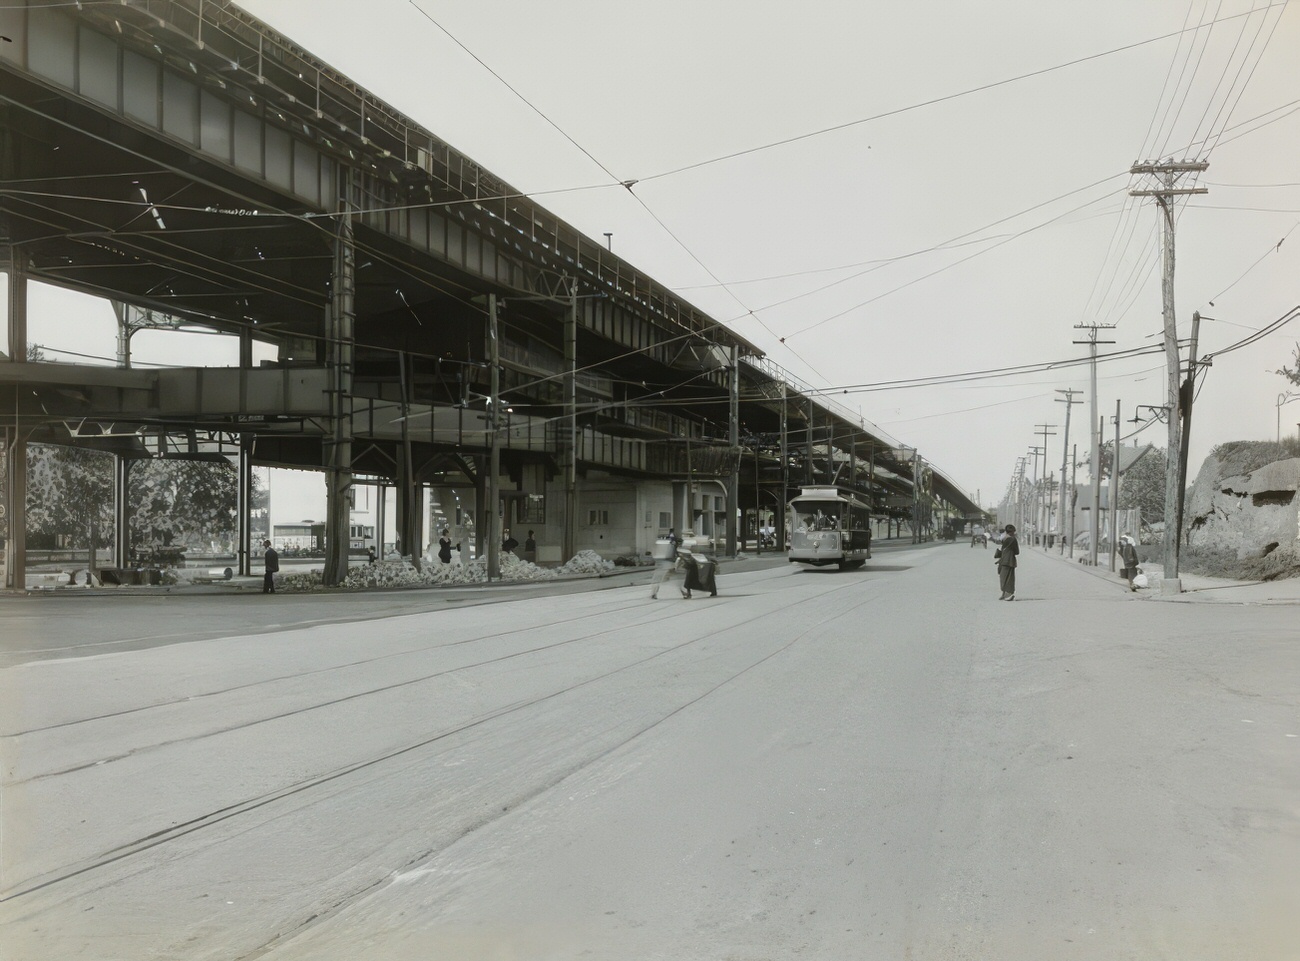 Intersection Of White Plains Rd. And Gun Hill Rd. With Elevated Railroad Tracks, Circa 1915.